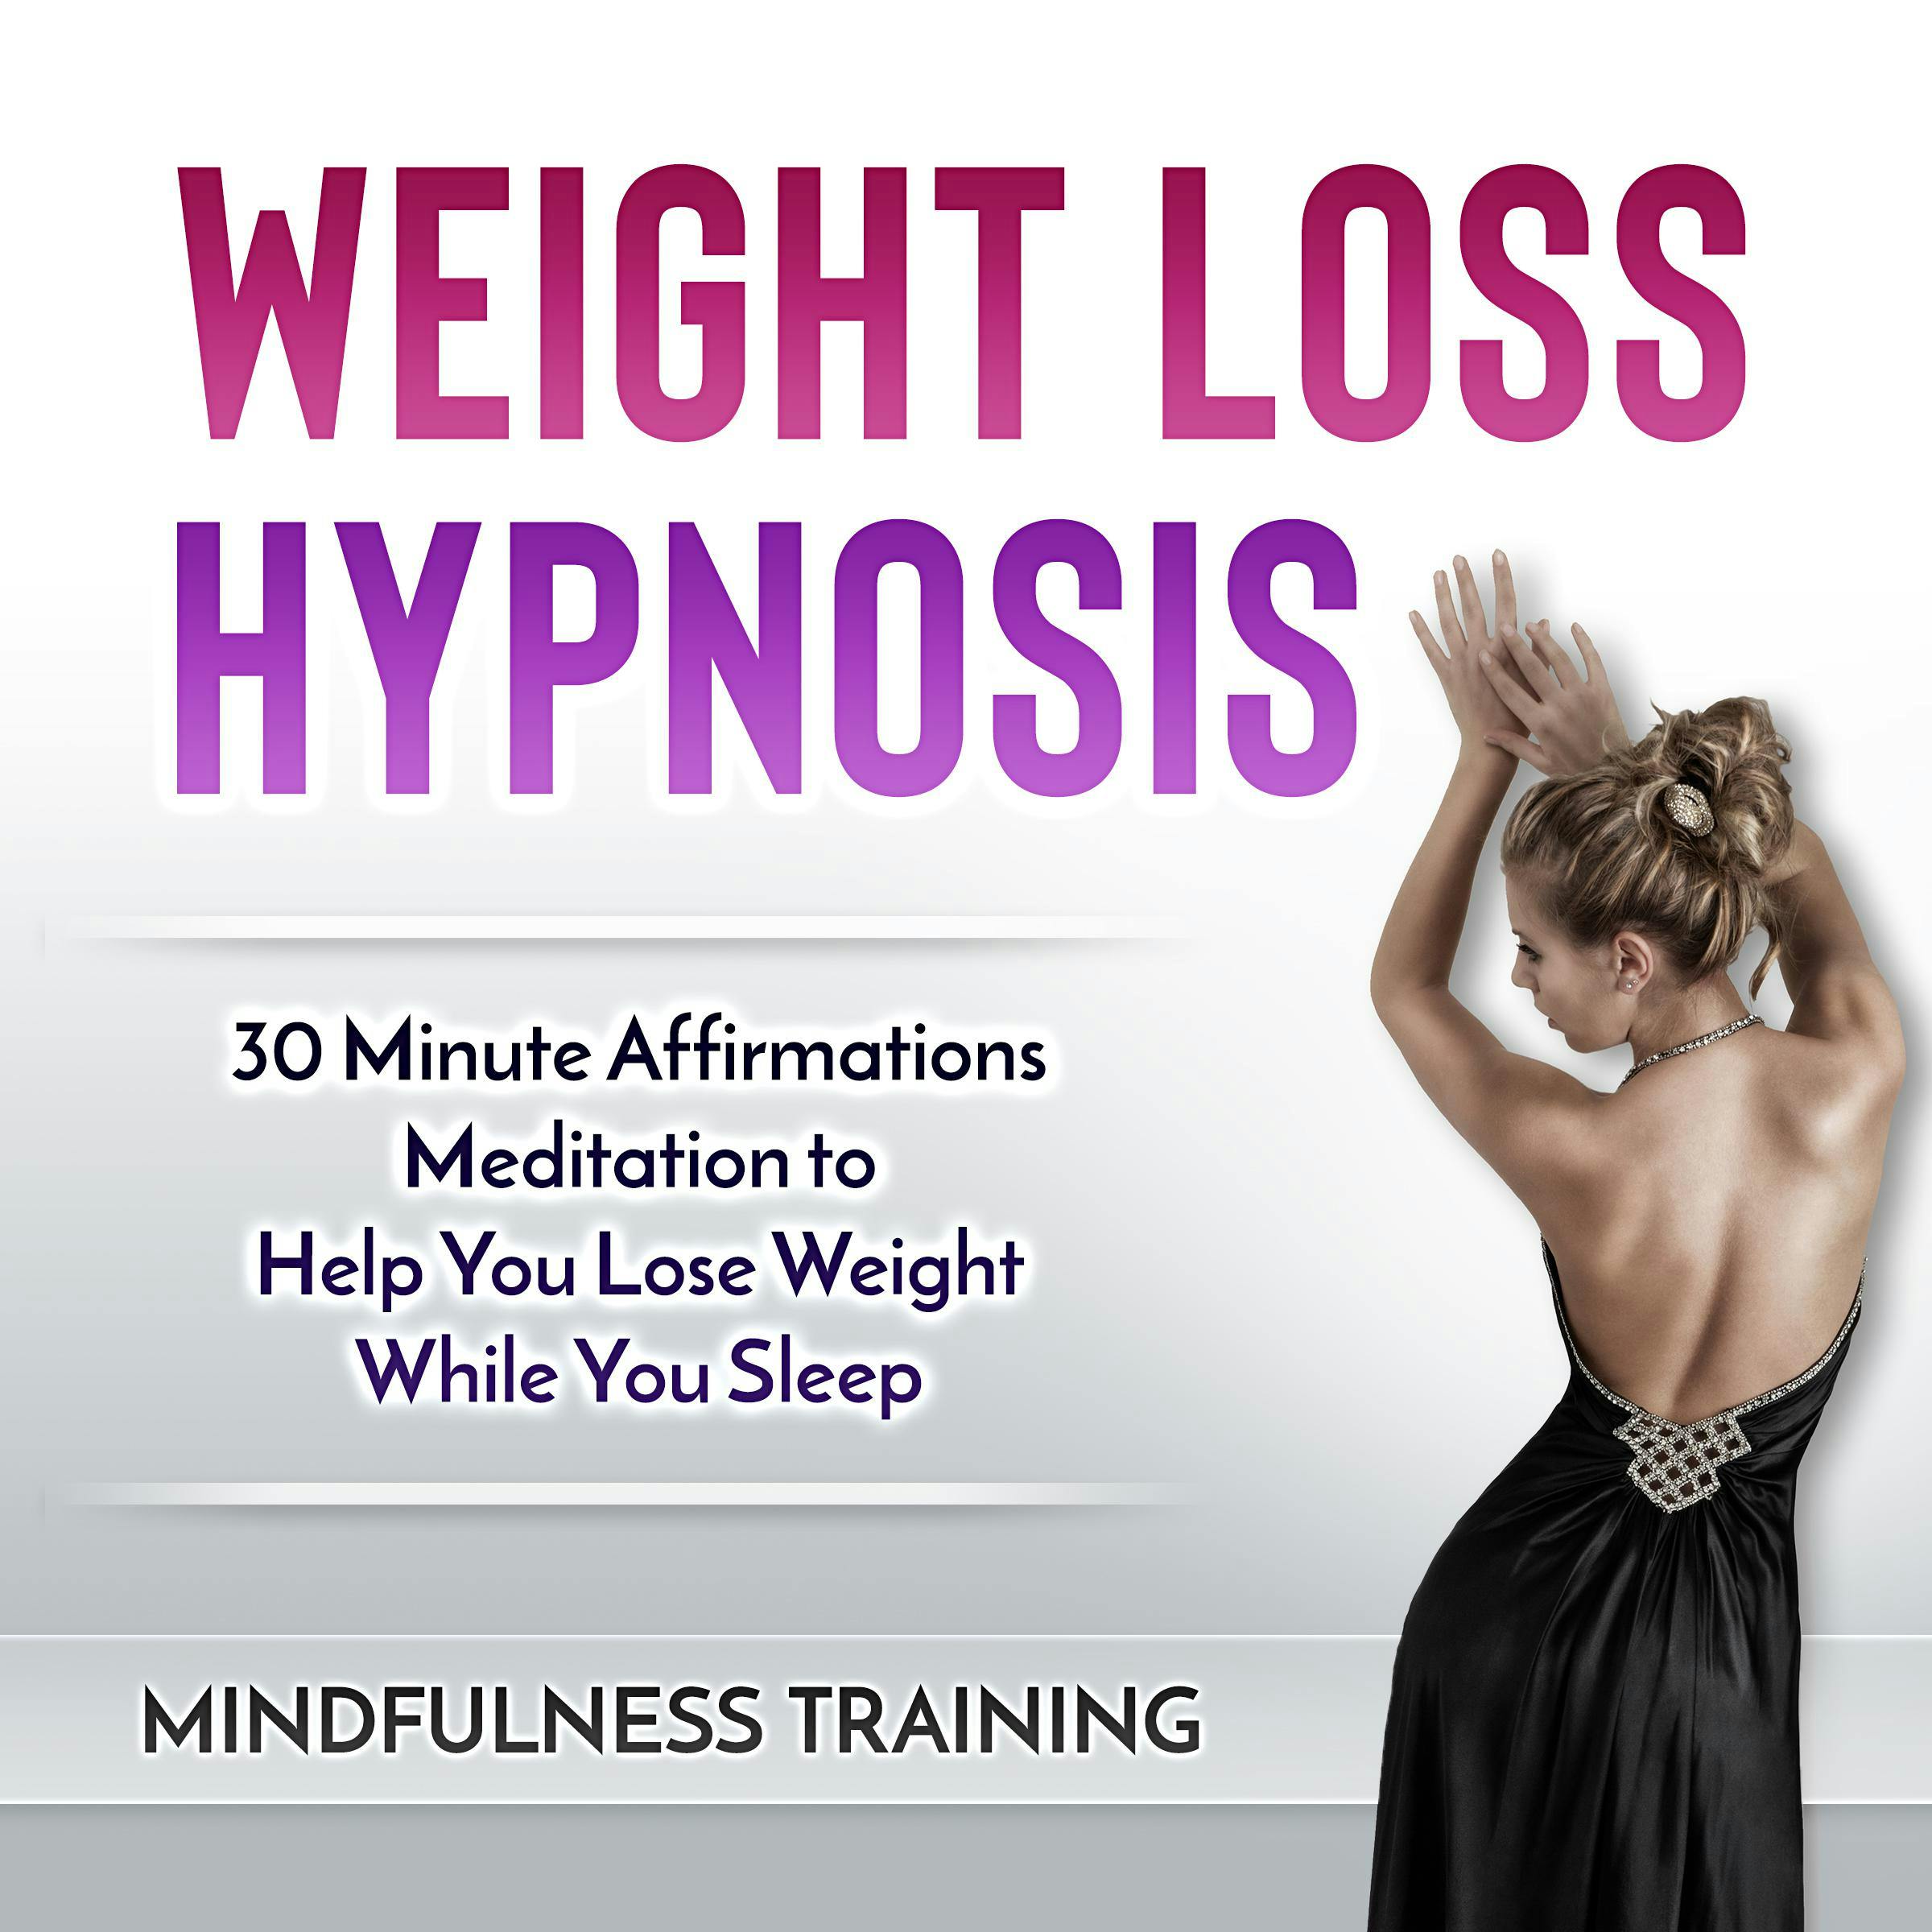 Weight Loss Hypnosis: 30 Minute Affirmations Meditation to Help You Lose Weight While You Sleep - Mindfulness Training